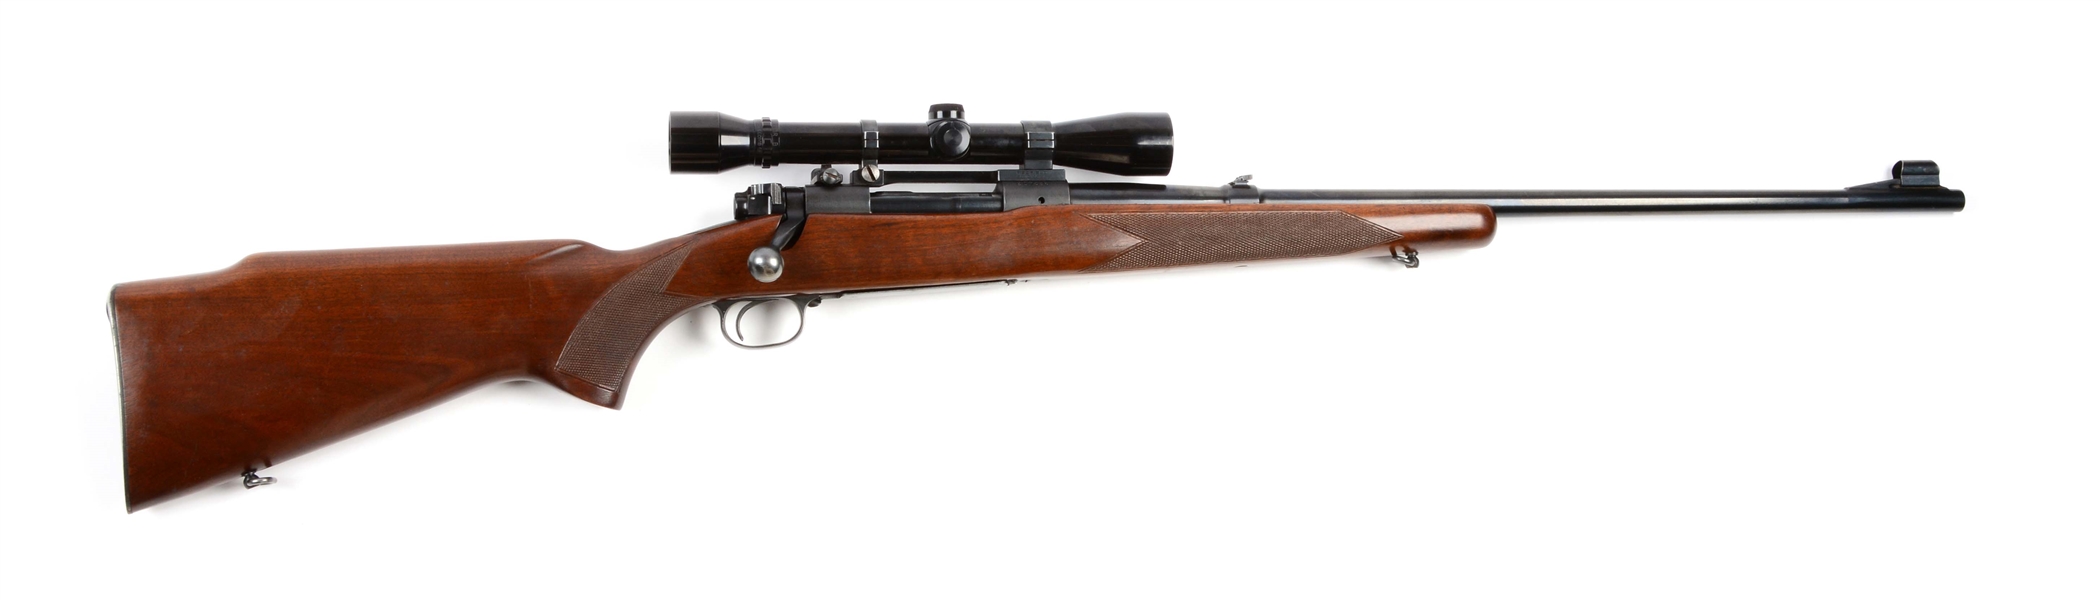 (C) WINCHESTER MODEL 70 BOLT ACTION RIFLE.